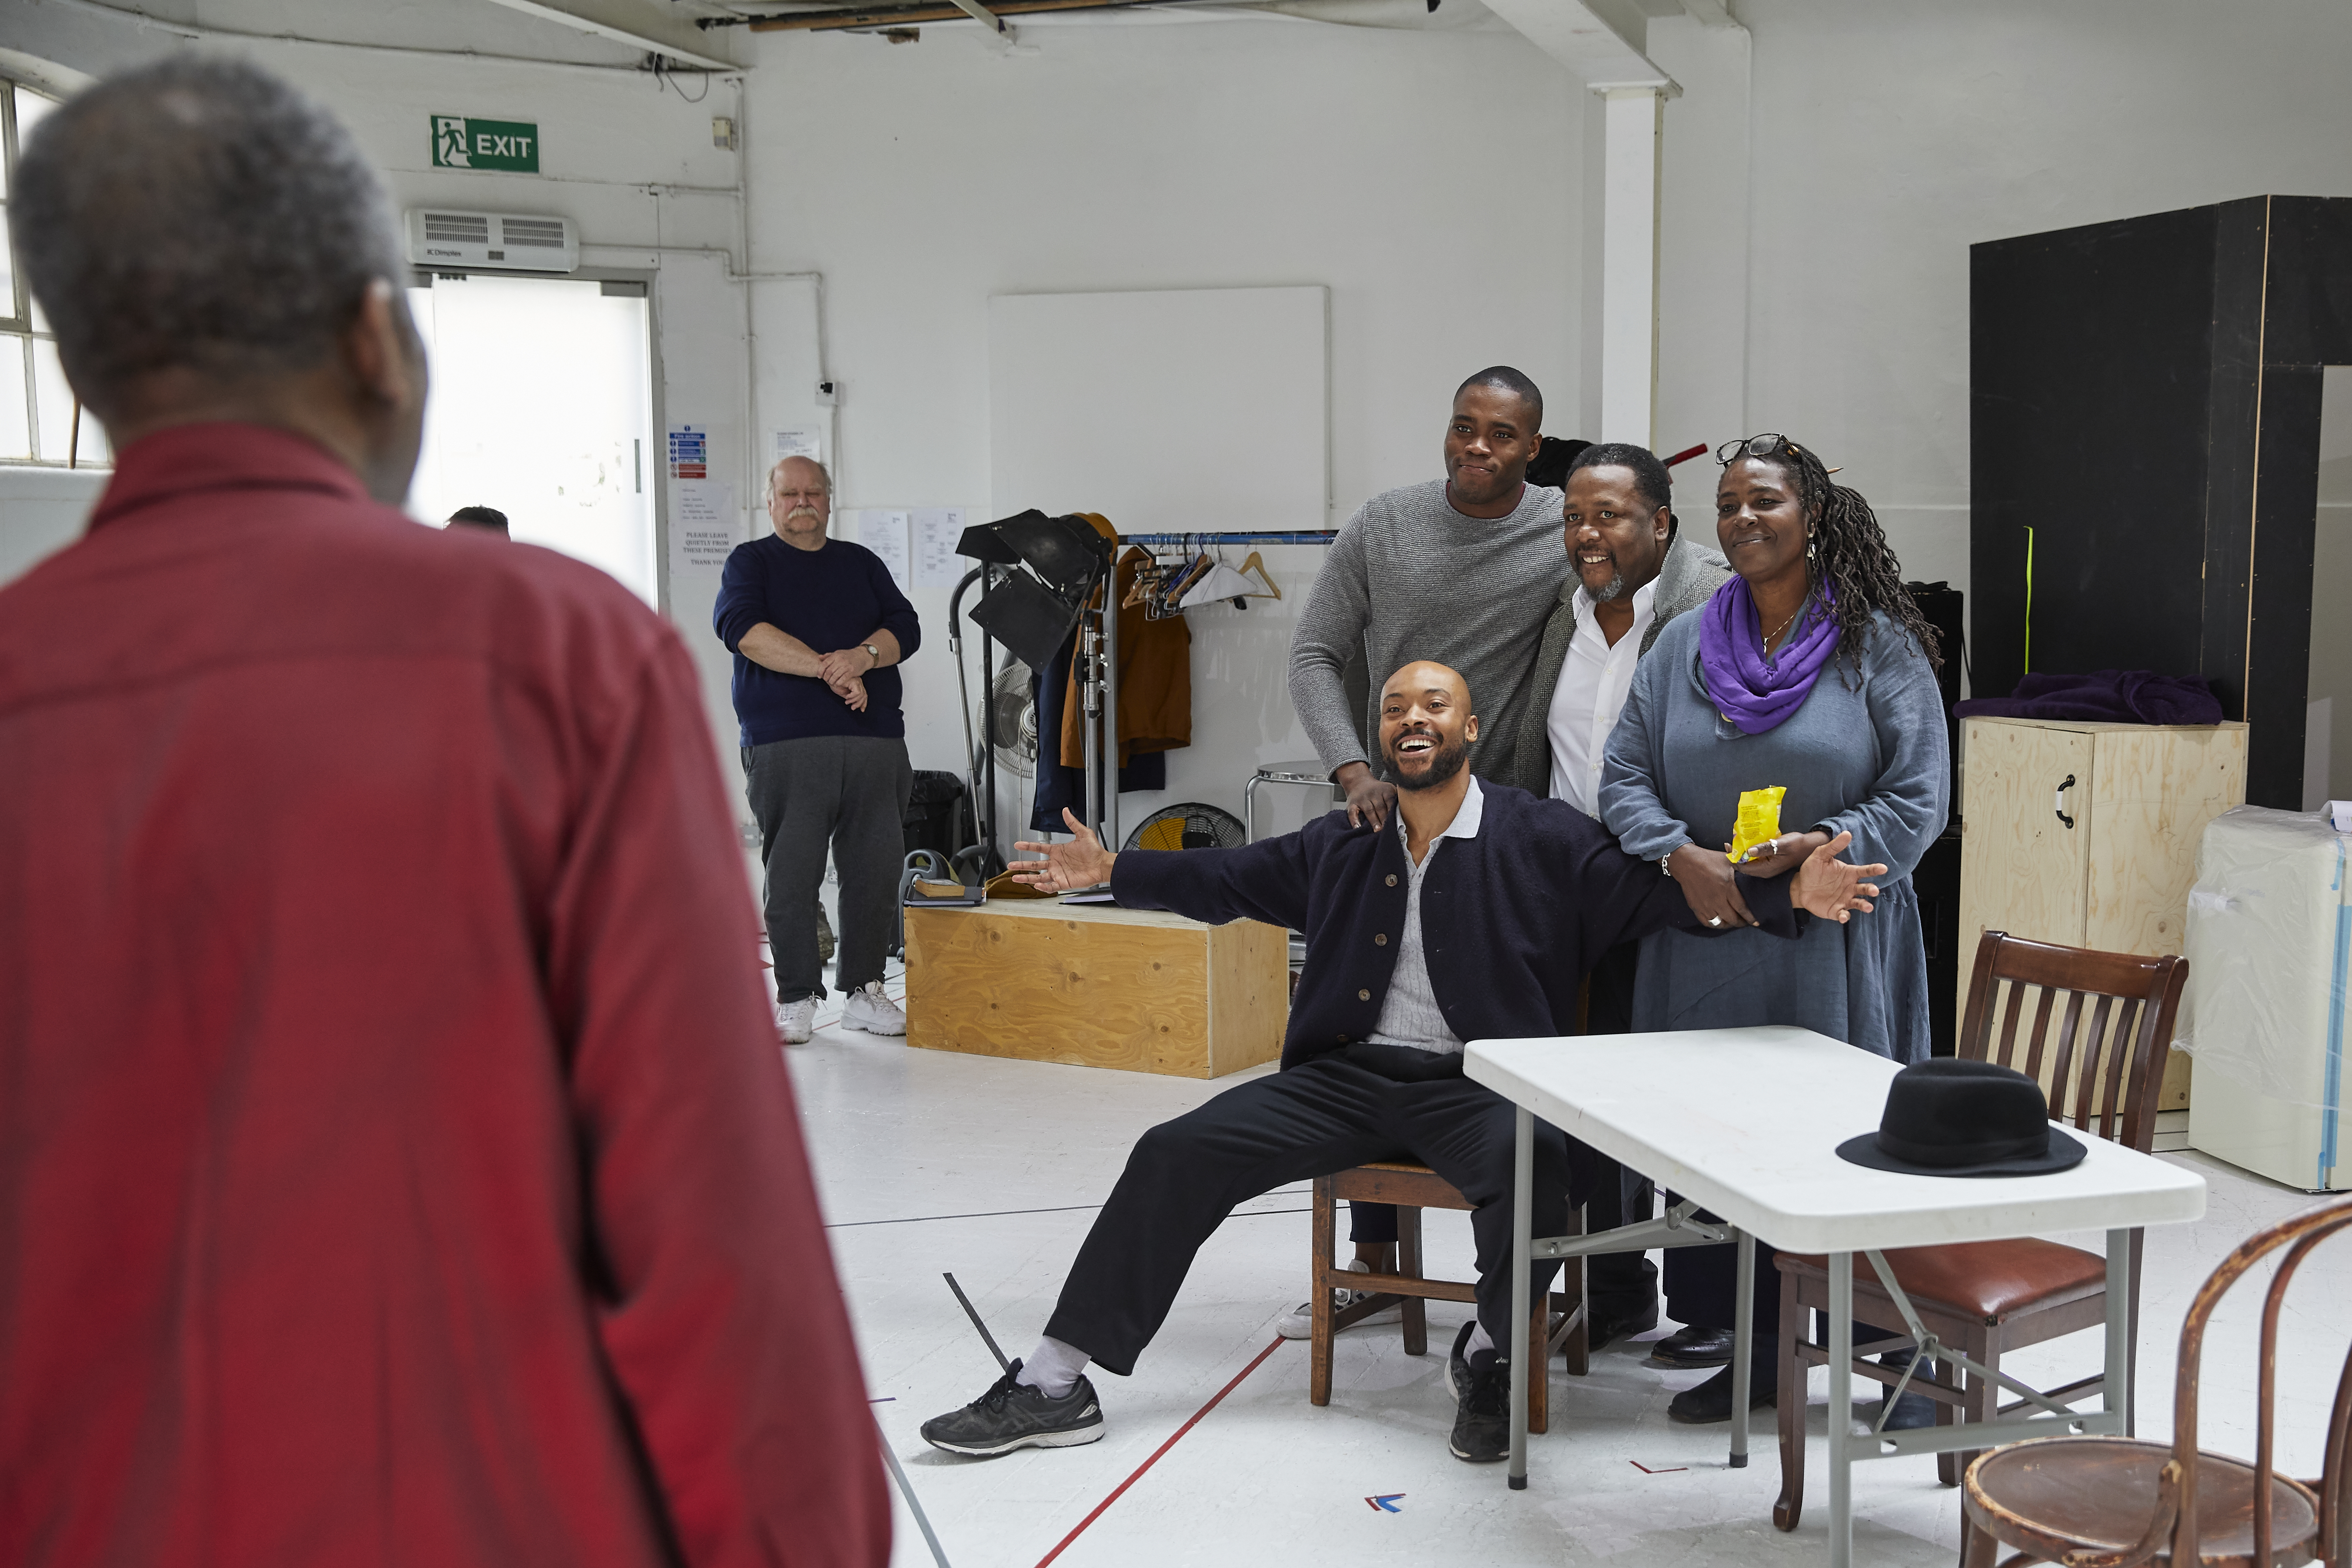 Young Vic</p>
<p>DEATH OF A SALESMAN<br />
Rehearsals